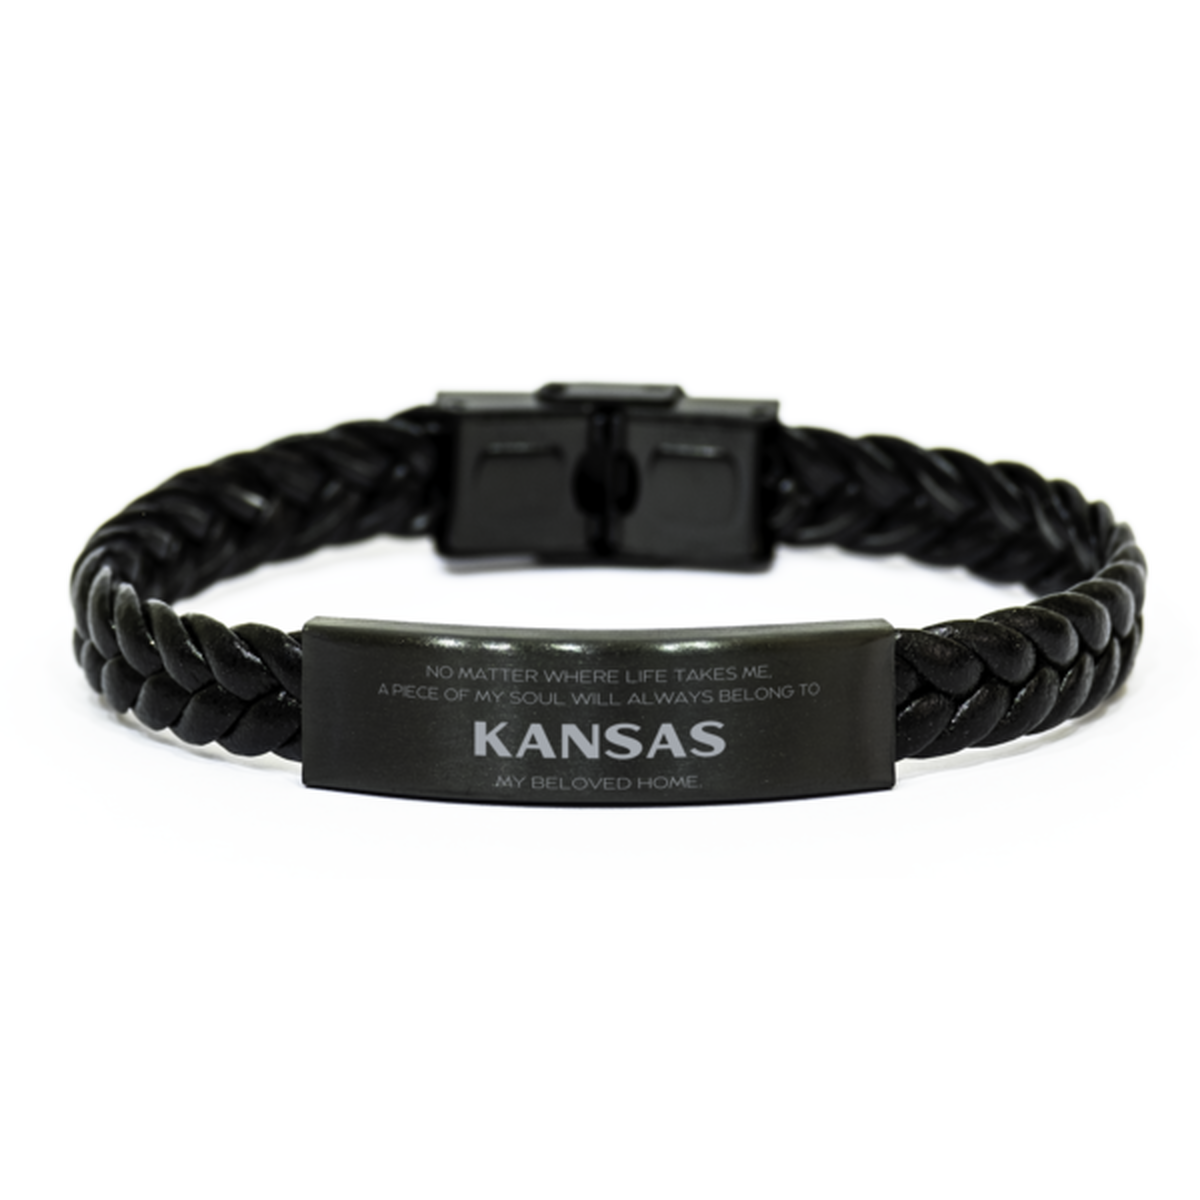 Love Kansas State Gifts, My soul will always belong to Kansas, Proud Braided Leather Bracelet, Birthday Unique Gifts For Kansas Men, Women, Friends